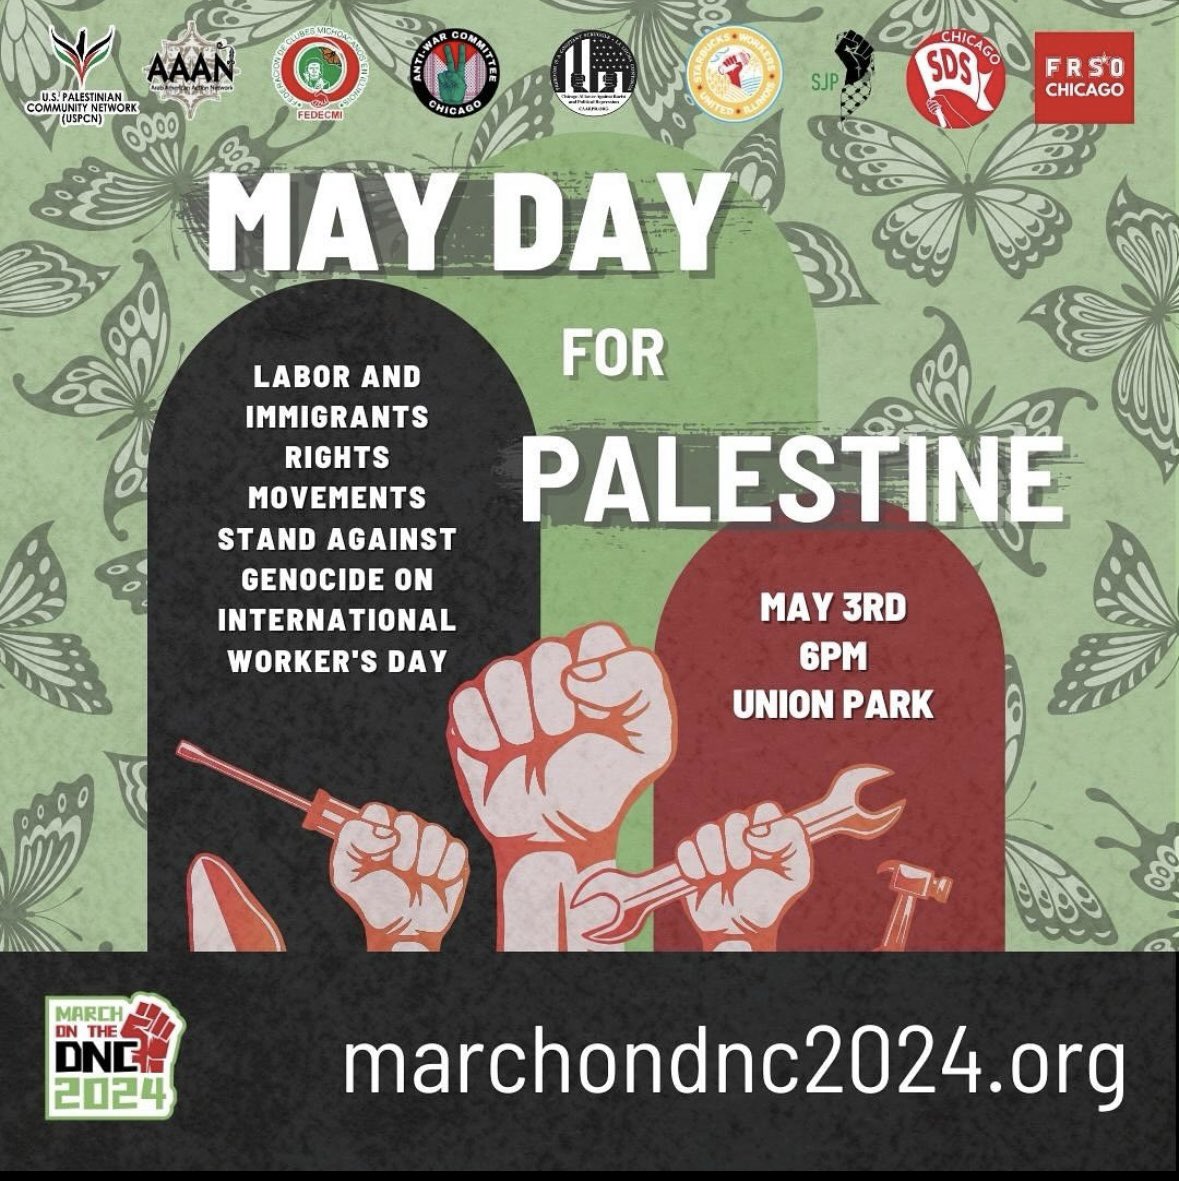 TODAY! Join the @MarchOnDNC2024 coalition at 6PM today at Union Park for our May Day Rally!